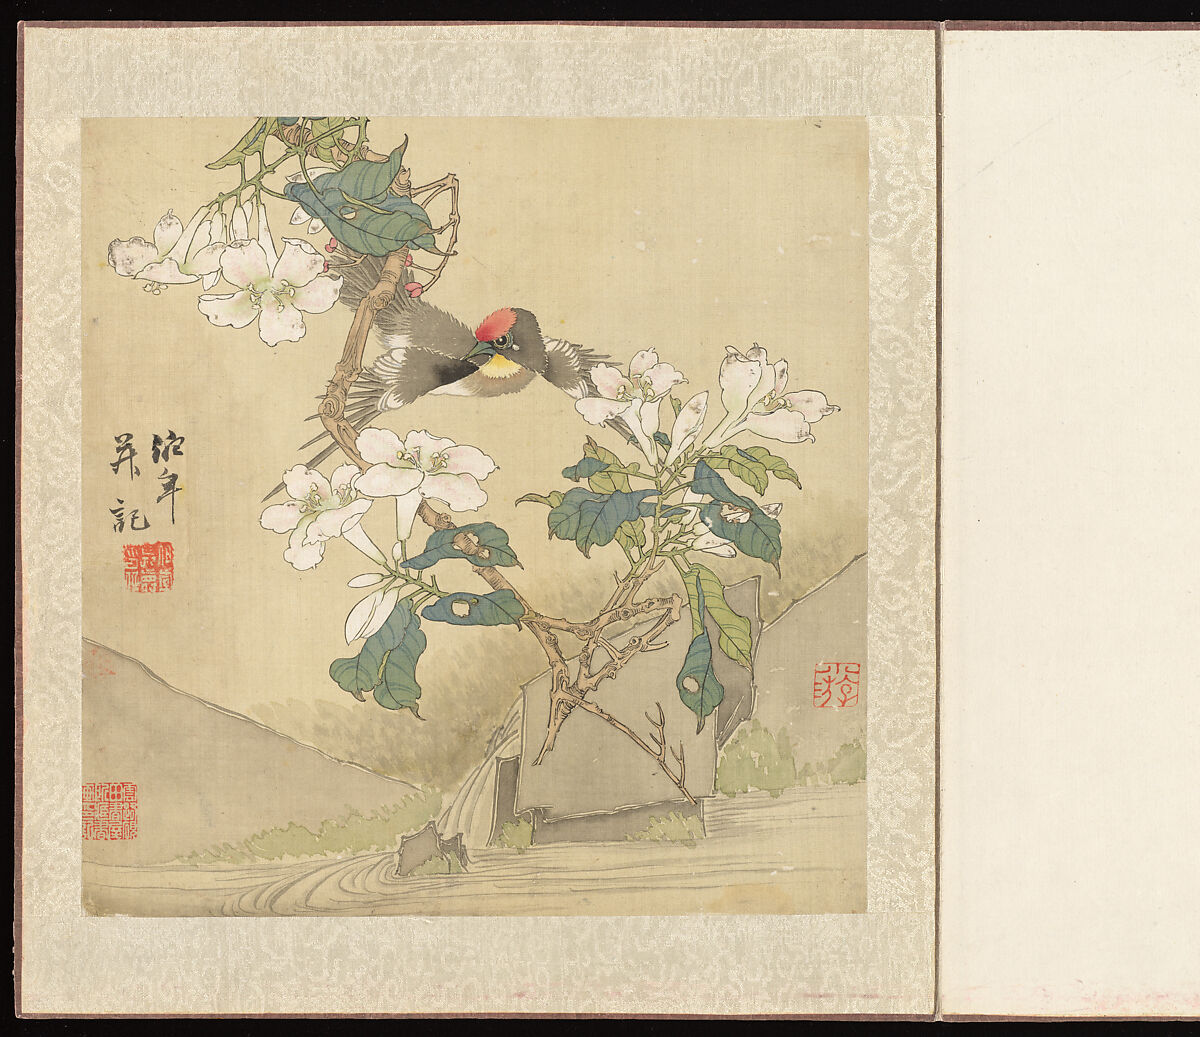 Flowers and Birds, Ren Yi (Ren Bonian) (Chinese, 1840–1896), Album of six leaves; ink and color on silk, China 